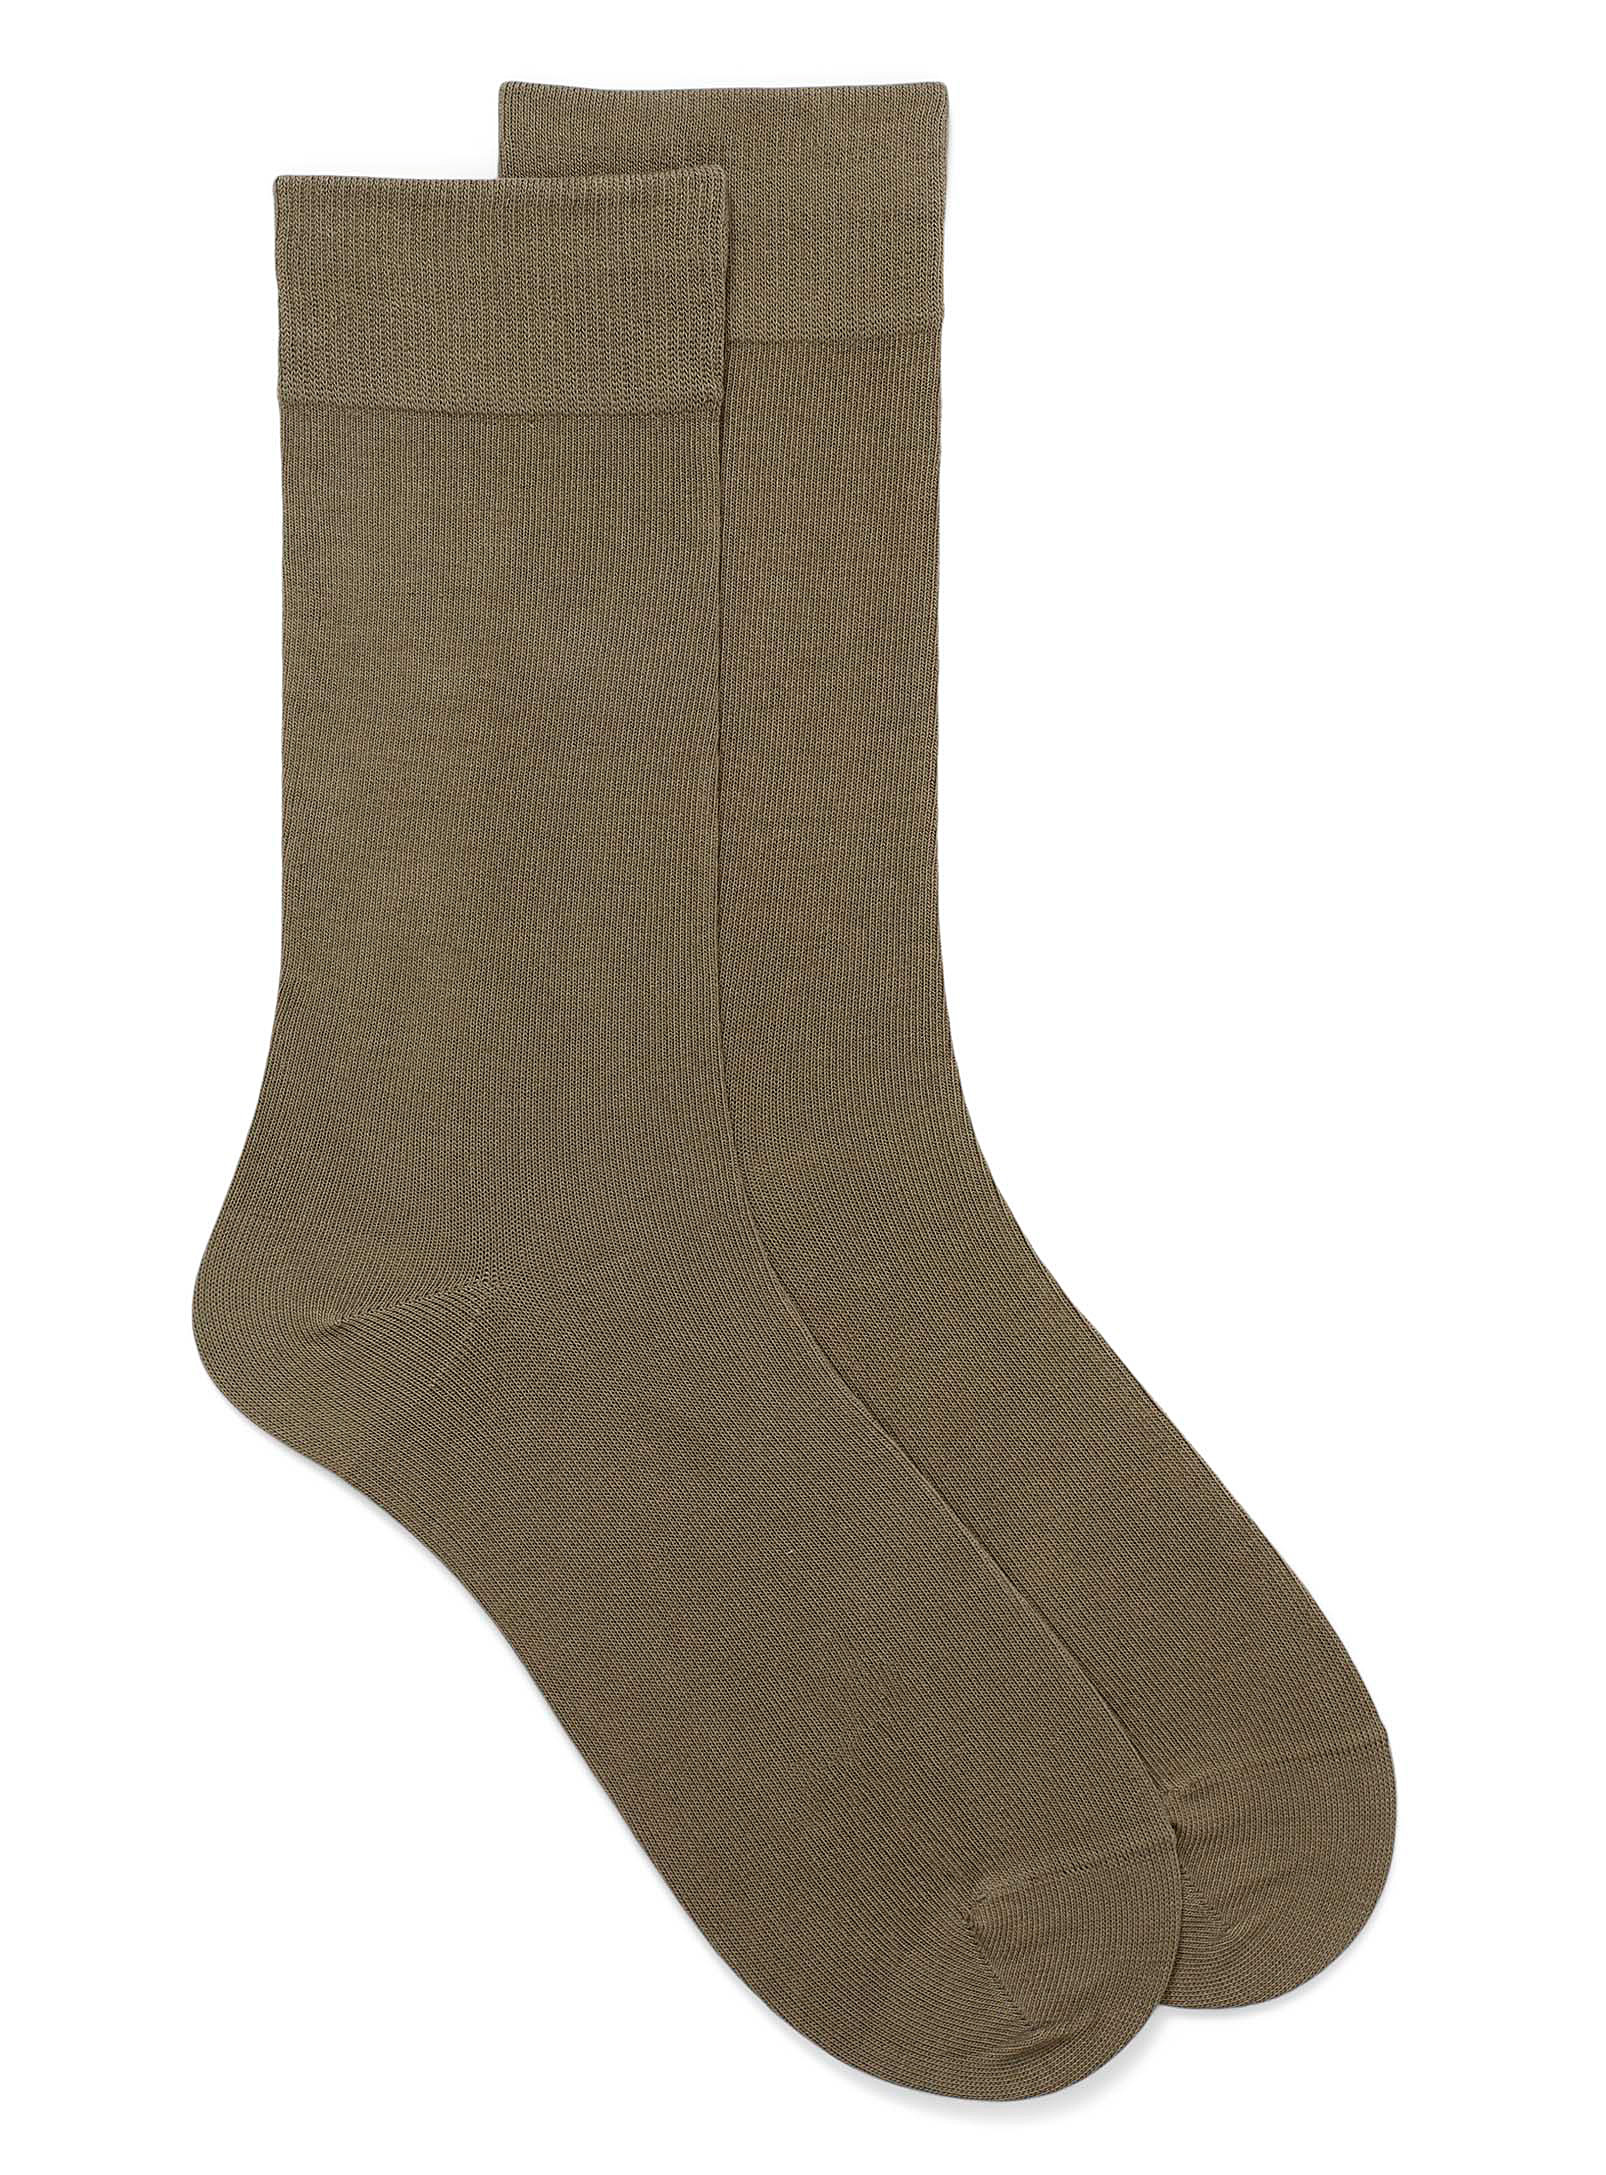 Le 31 Essential Organic Cotton Socks In Light Brown